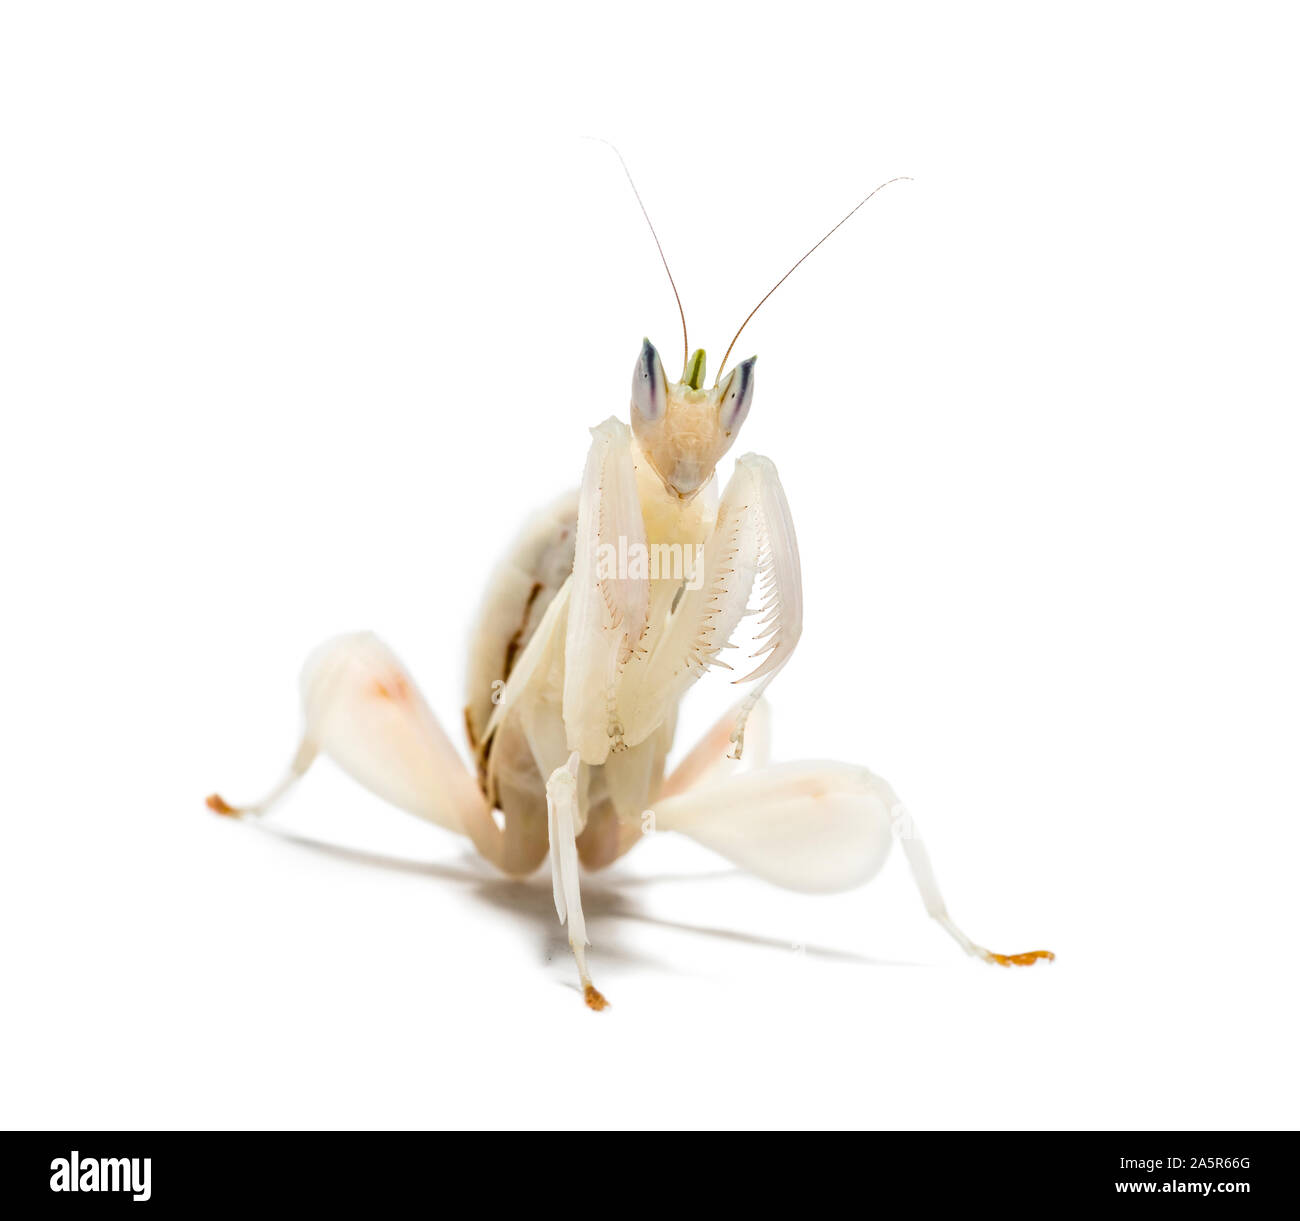 Young orchid mantis, Hymenopus coronatus, in front of white background Stock Photo